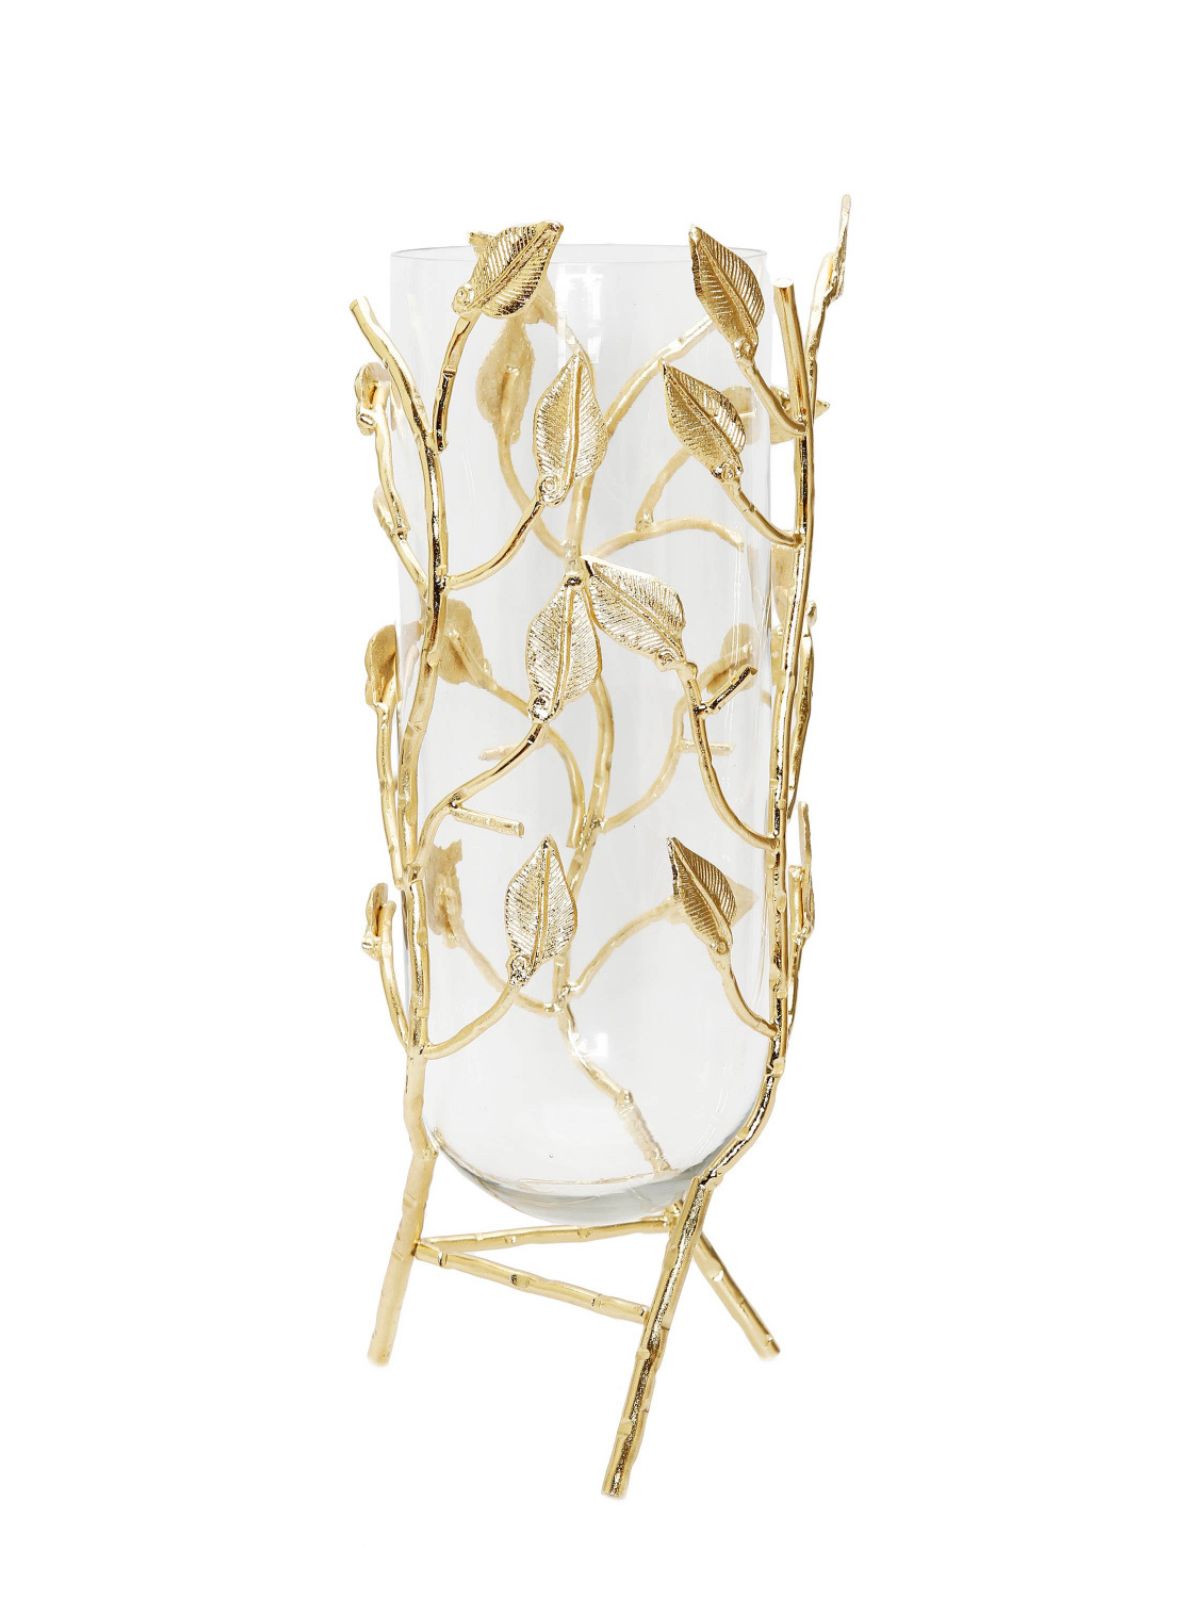 16H Gold Metal Branch Decorative Vase With Luxurious Clear Glass Insert - KYA Home Decor. 